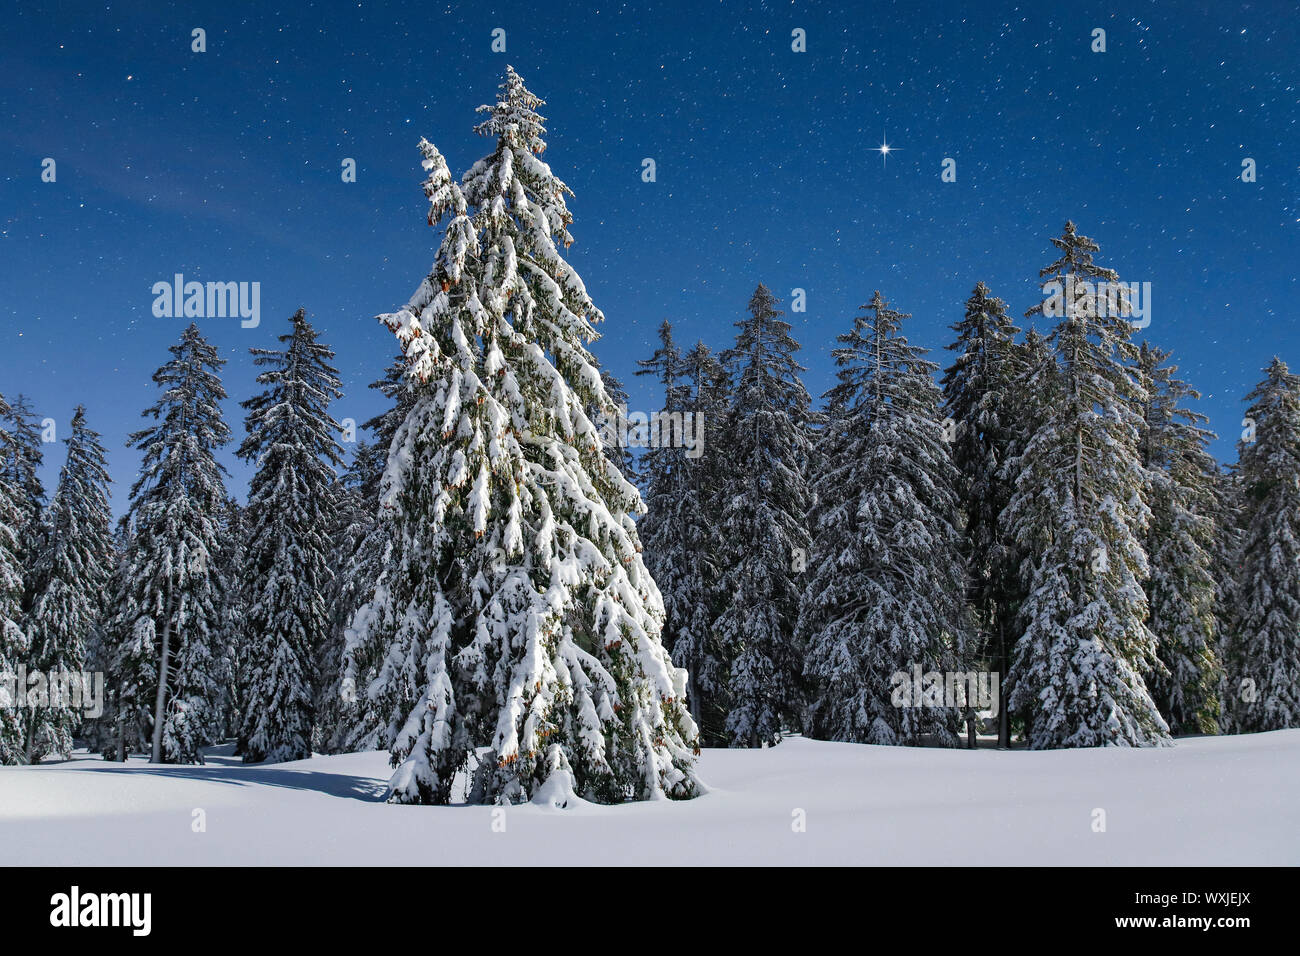 Norway Spruce (Picea abies). Snowy tree at night with starry sky. Switzerland Stock Photo